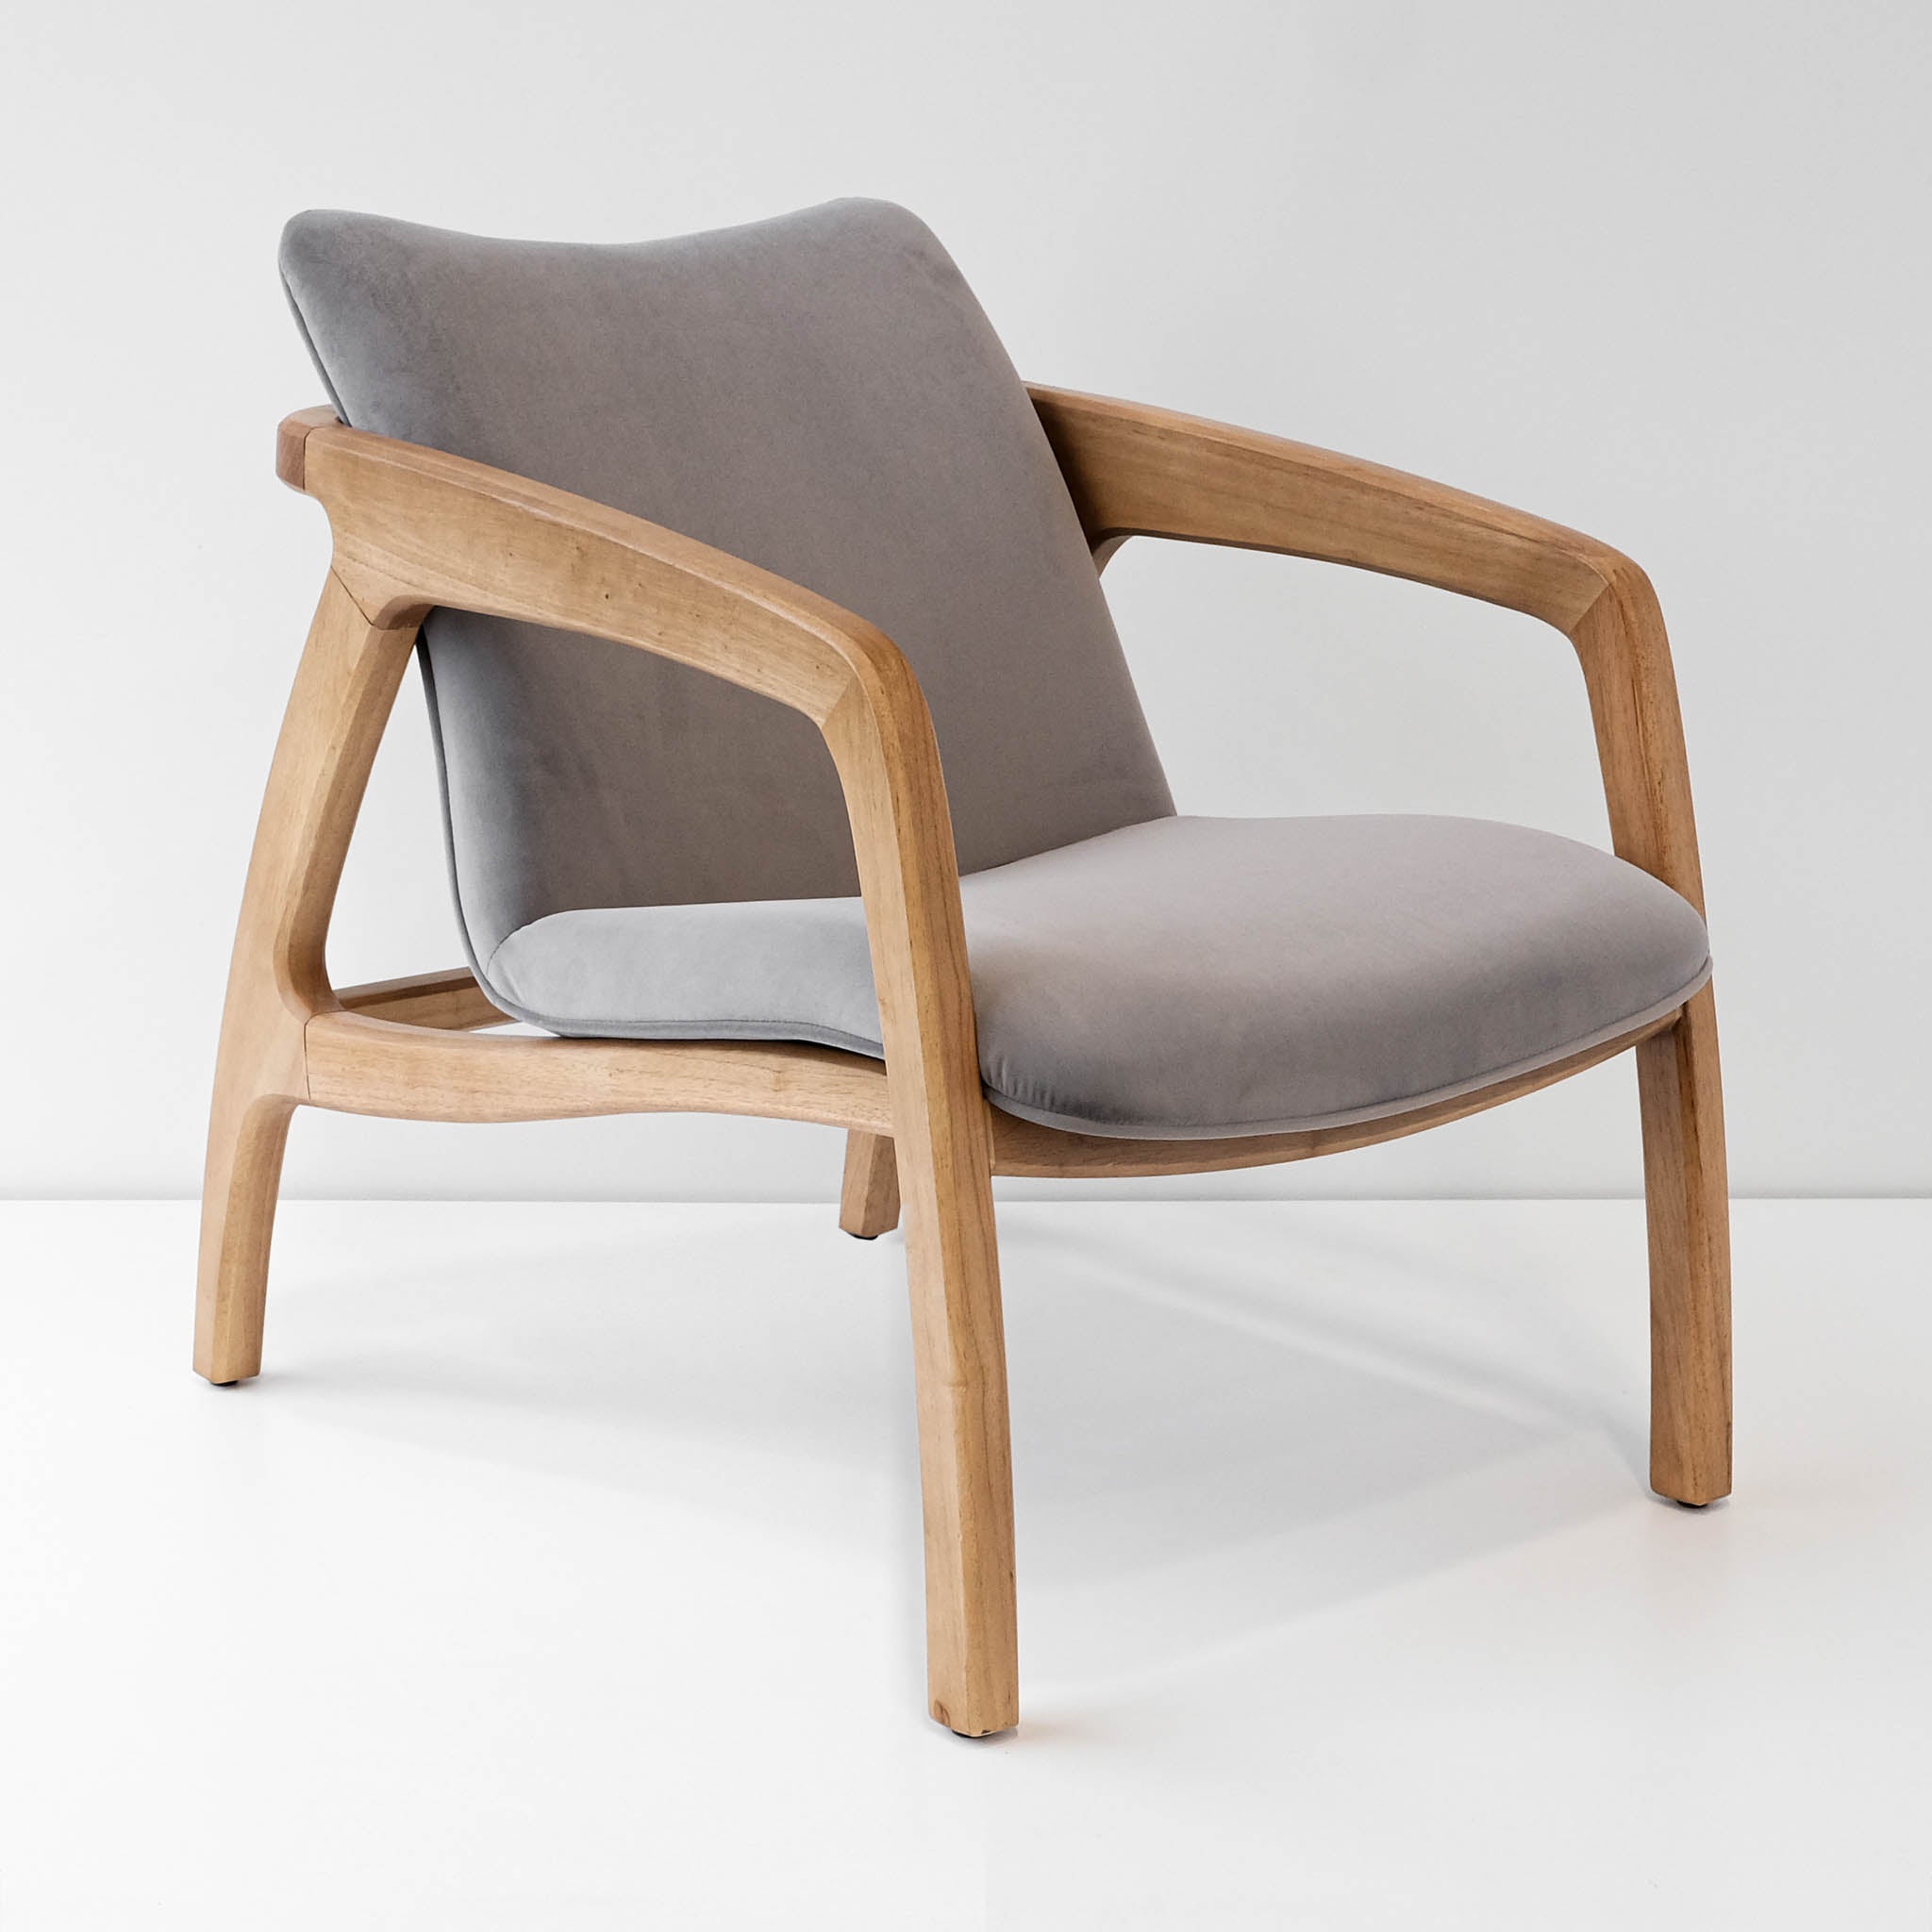 Danish style accent chair: Clean lines, timeless design.